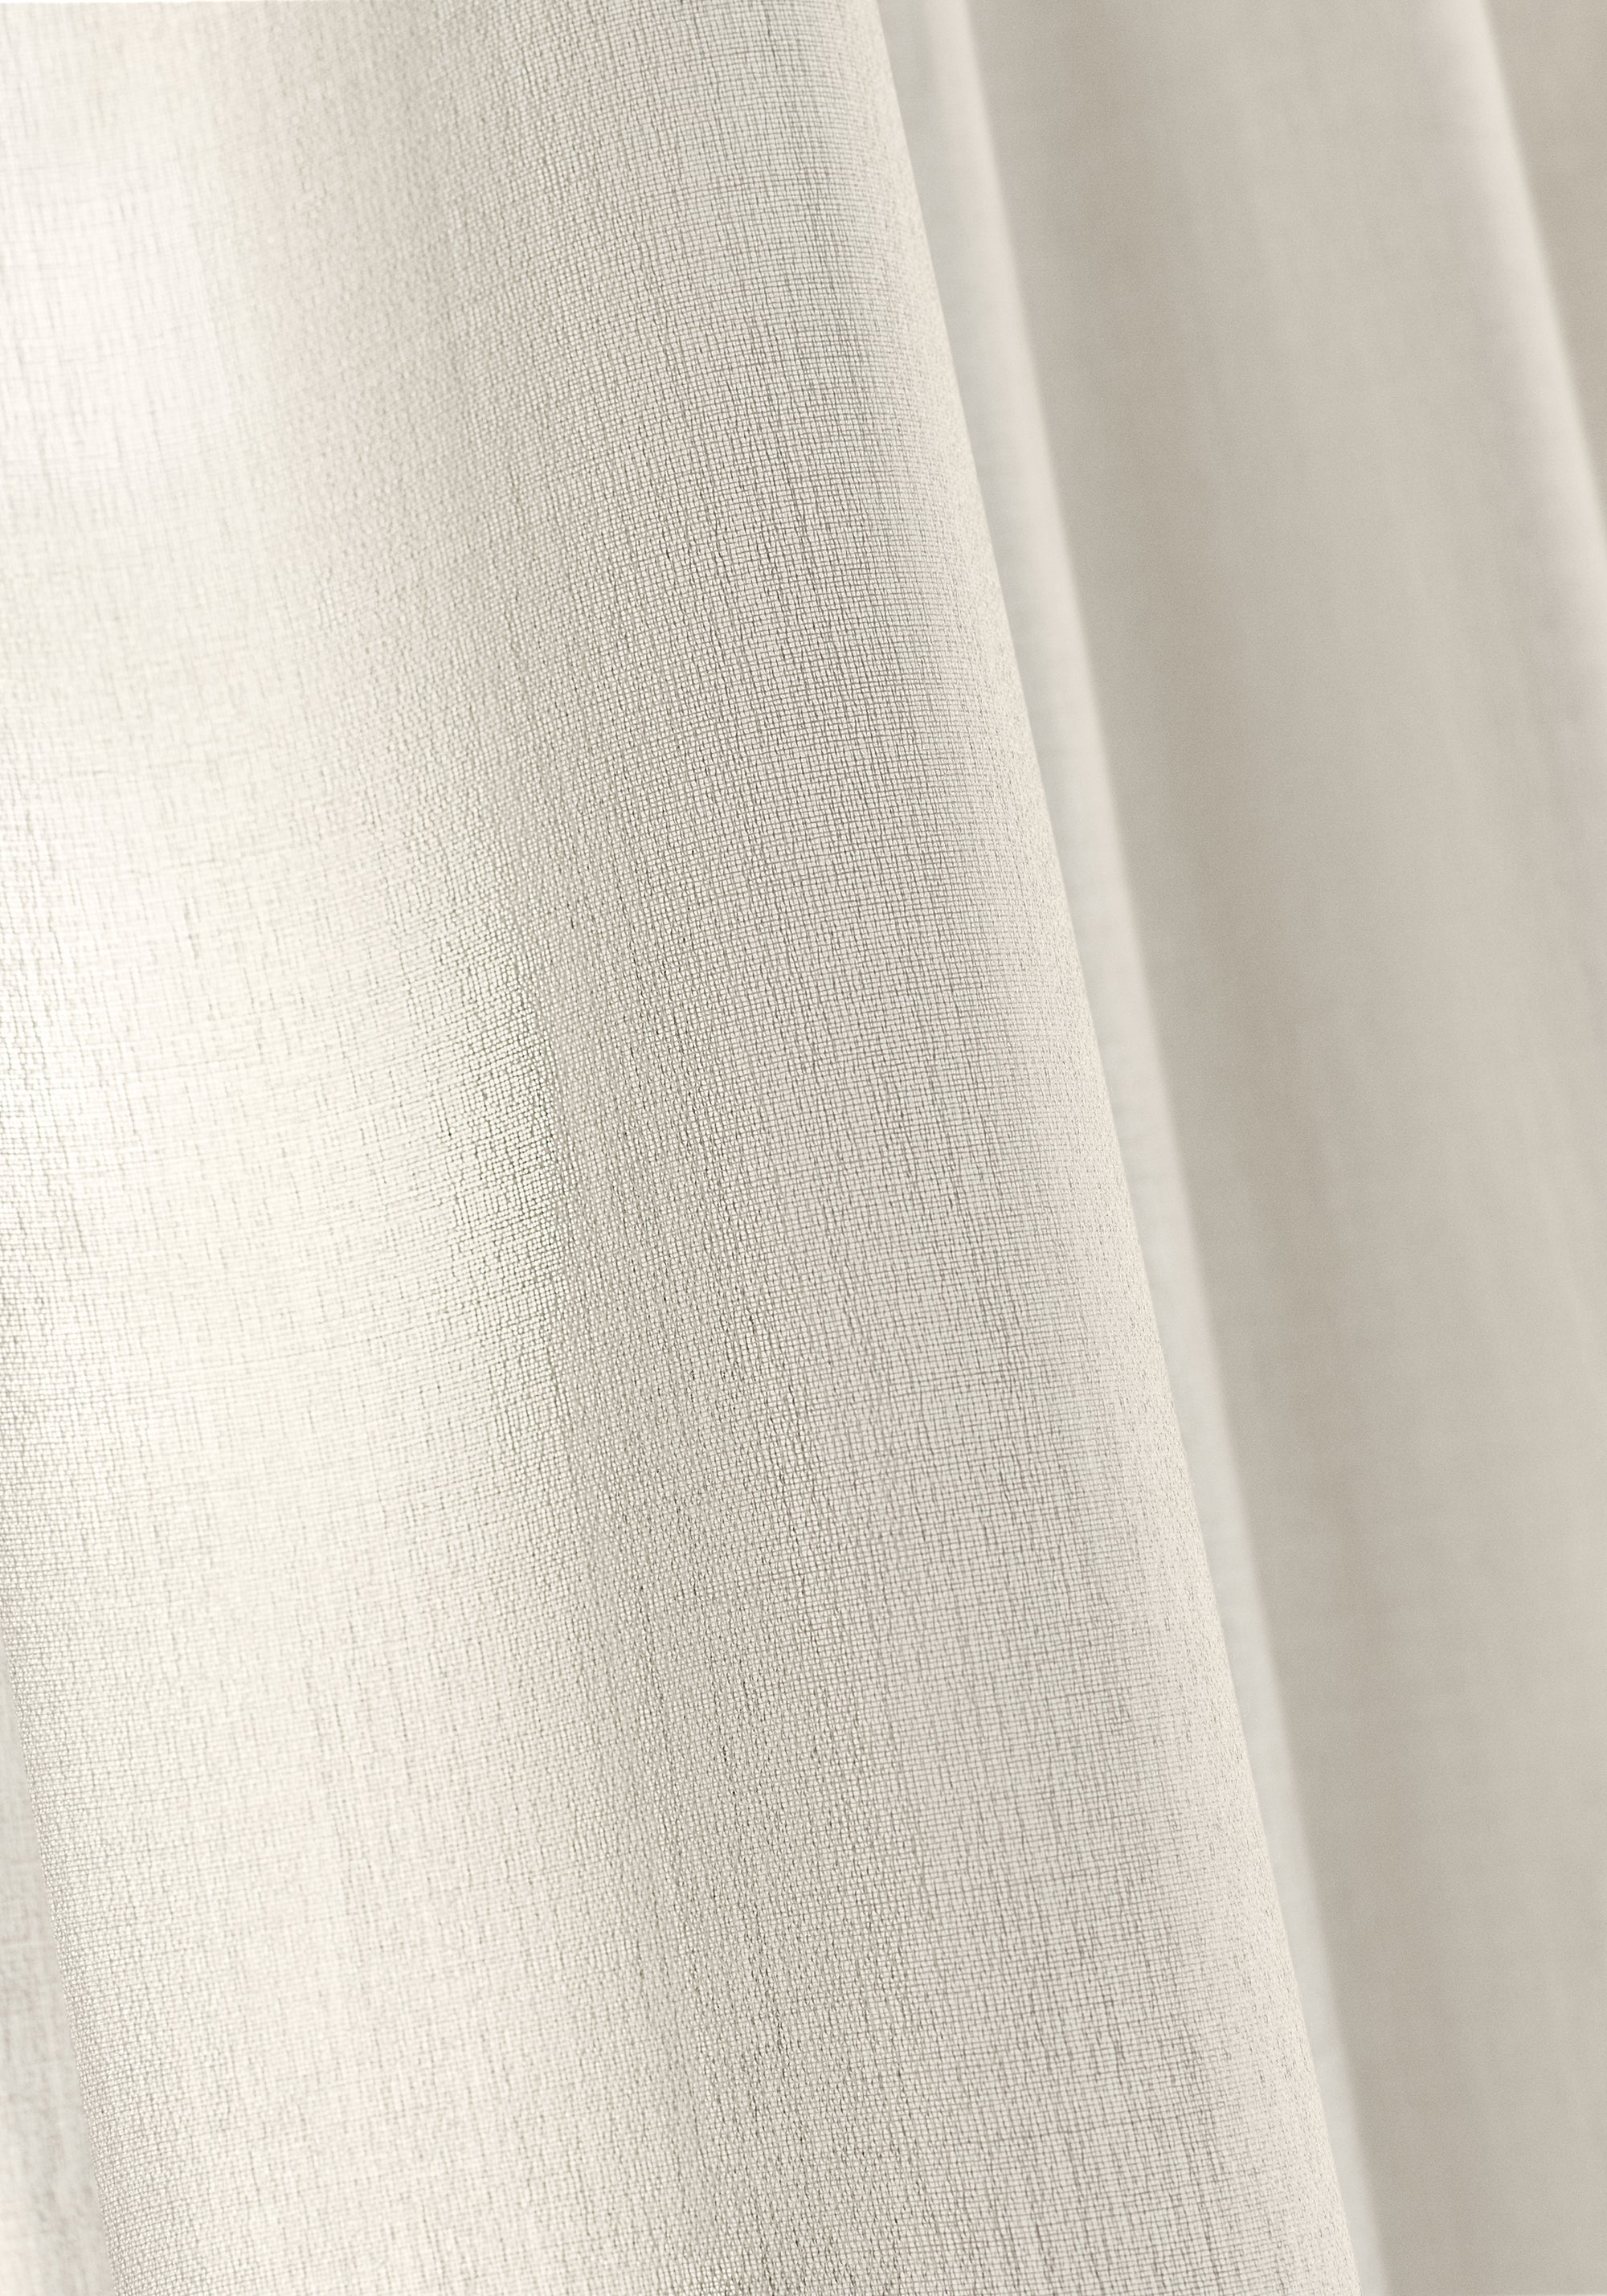 Closeup detail of curtains made using Daphne fabric in flax color - pattern number FWW81730 - by Thibaut fabrics